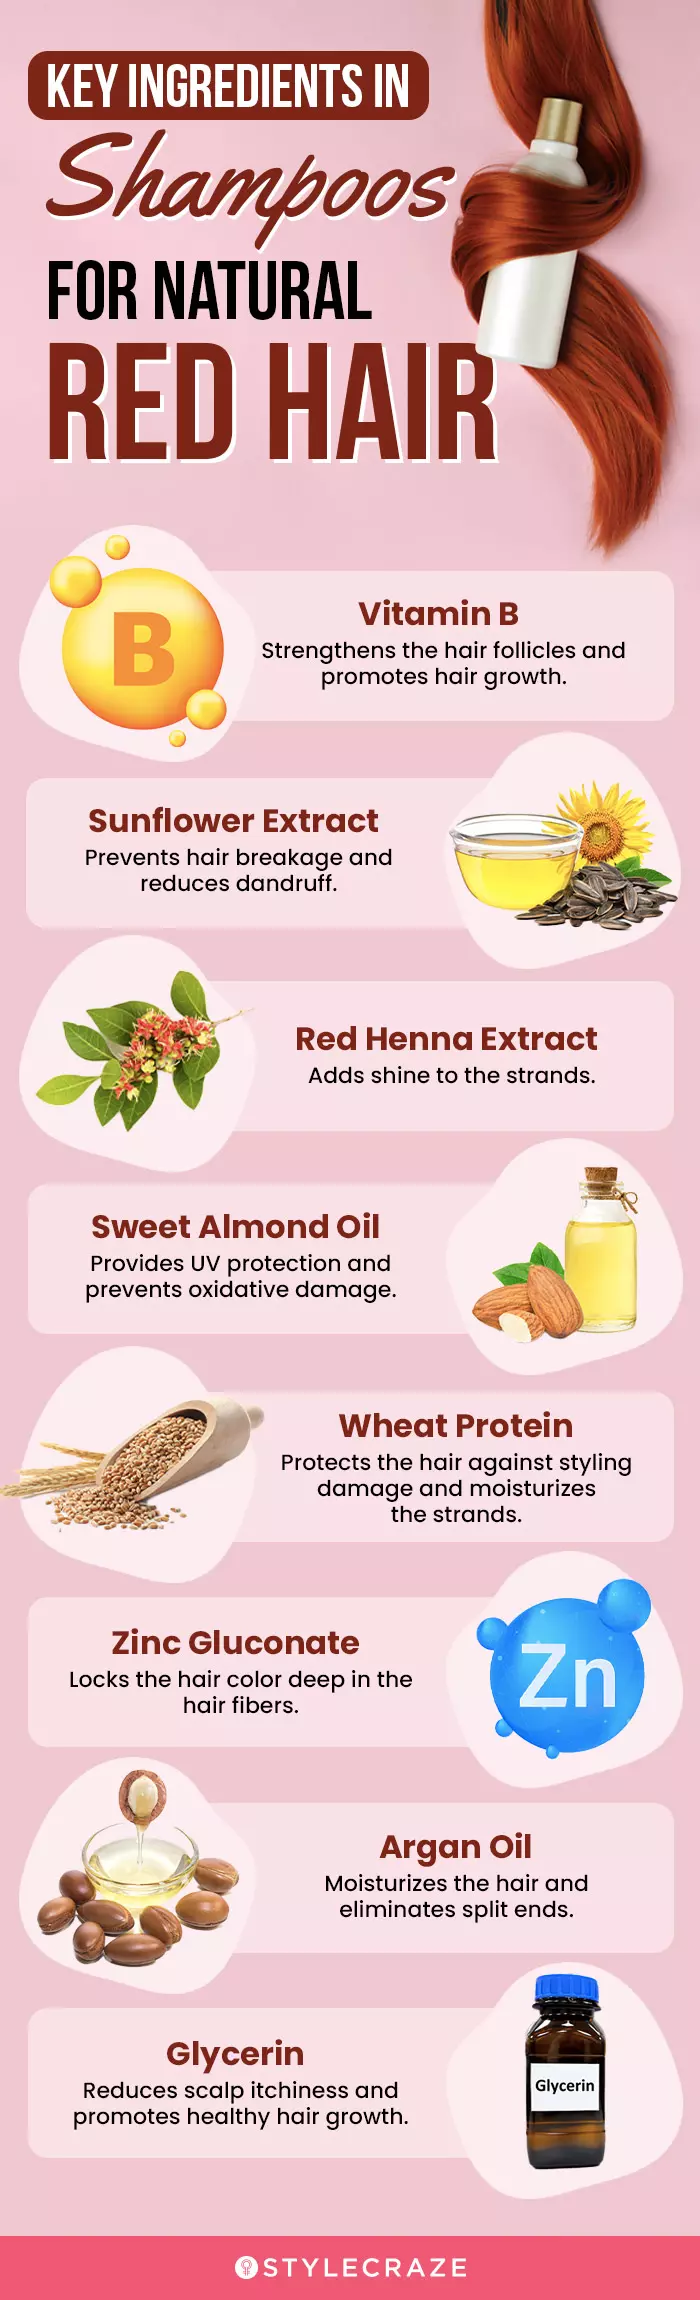 Shampoos For Natural Red Hair: Ingredients in Focus (infographic)